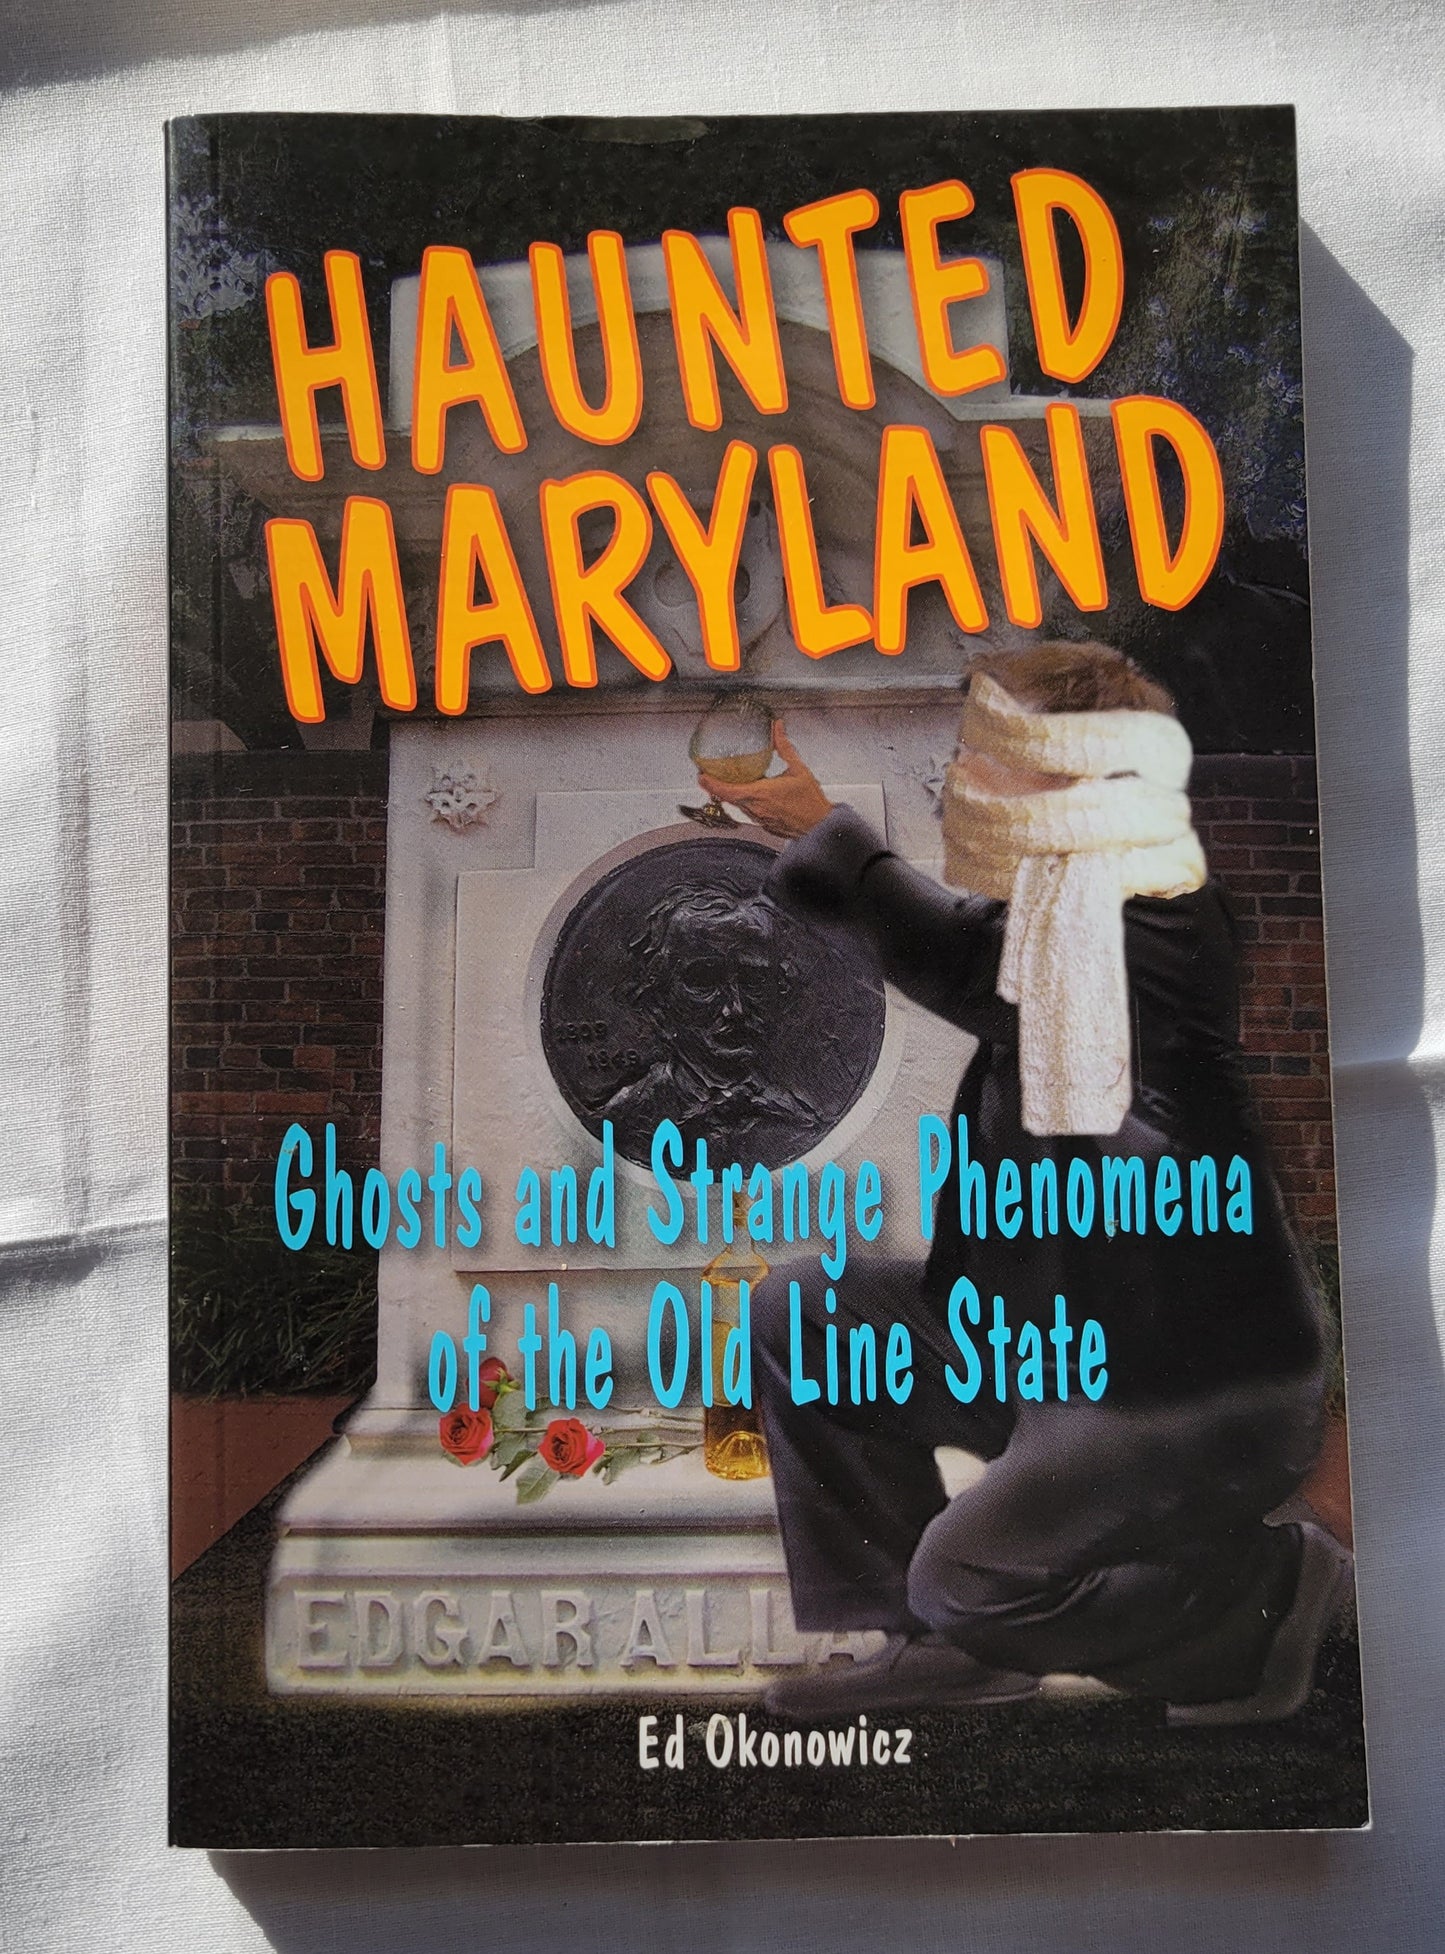 Used book for sale, "Haunted Maryland: Ghosts and Strange Phenomena of the Old Line State" by Ed Okonowicz, published by Stackpole Books. View of front cover.